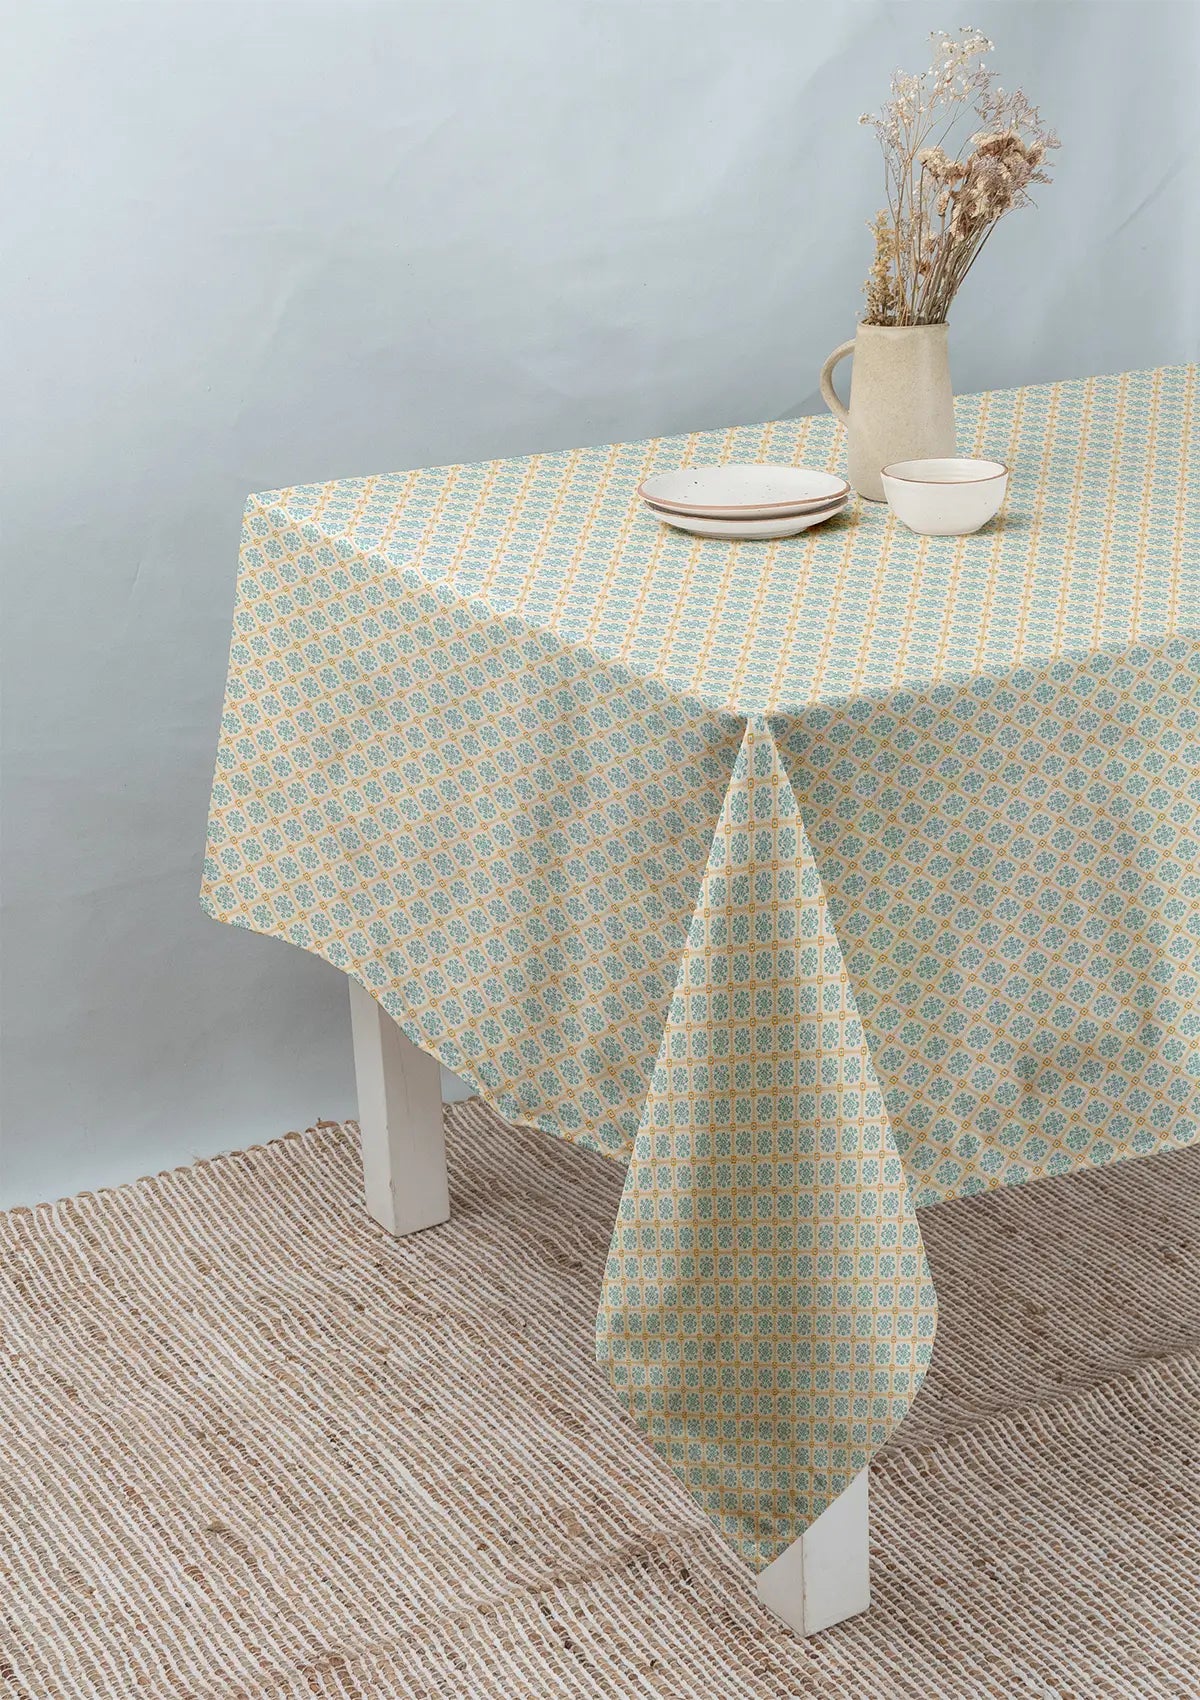 Yura 100% cotton geomtric table cloth for 4 seater or 6 seater dining - Aqua blue